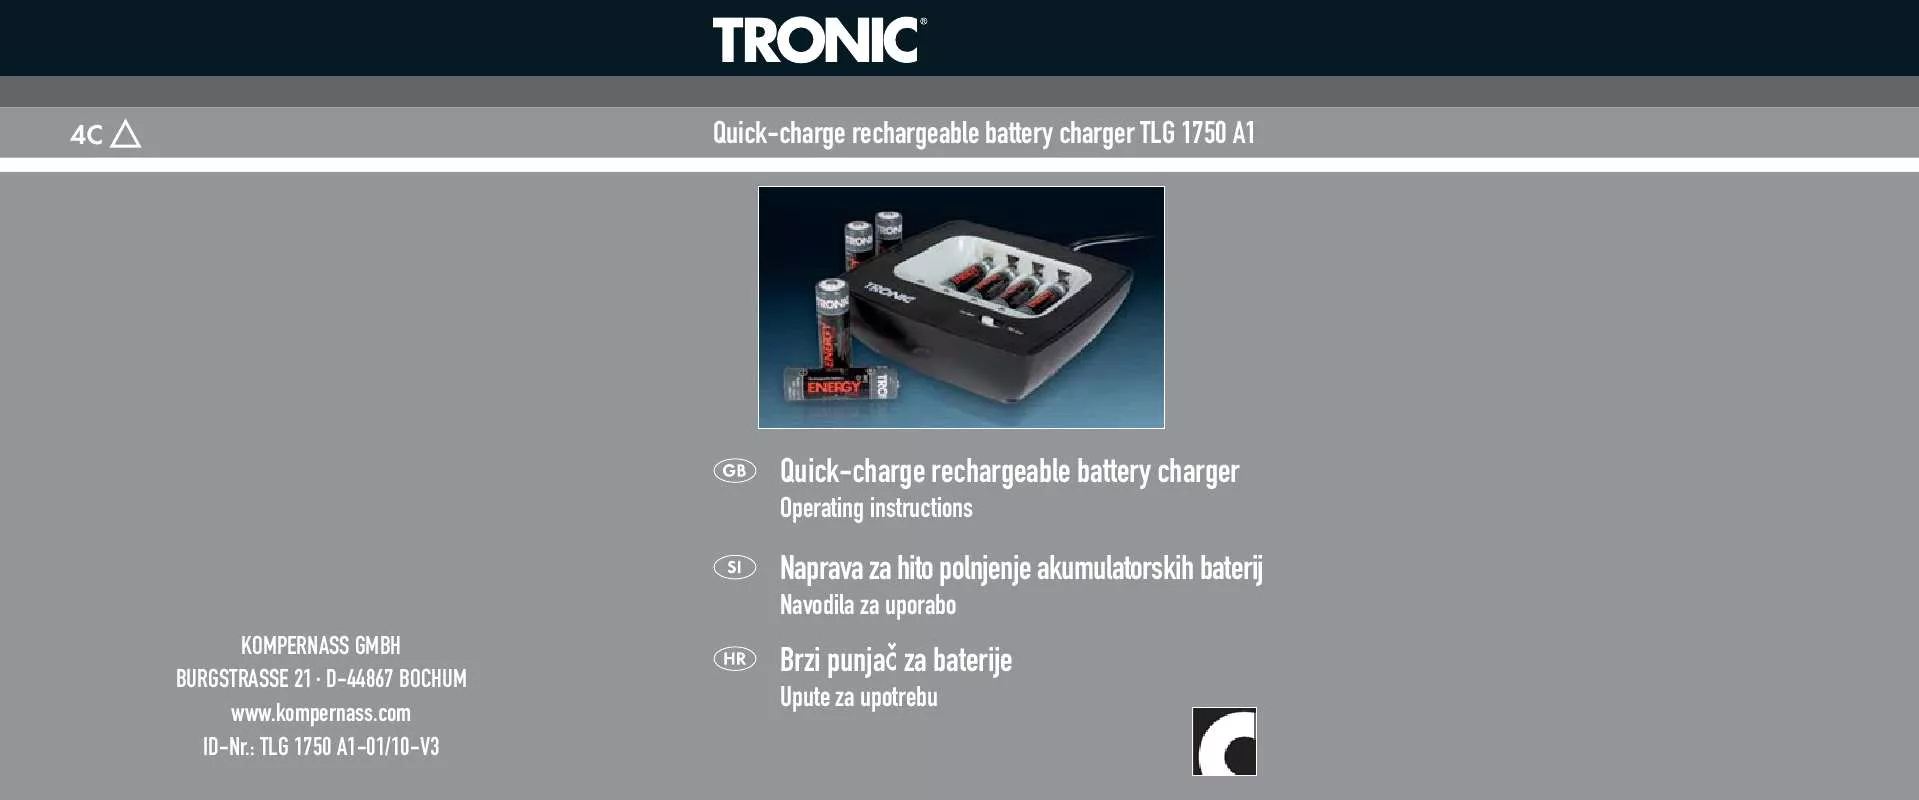 Mode d'emploi TRONIC TLG 1750 A1 QUICK-CHARGE RECHARGEABLE BATTERY CHARGER